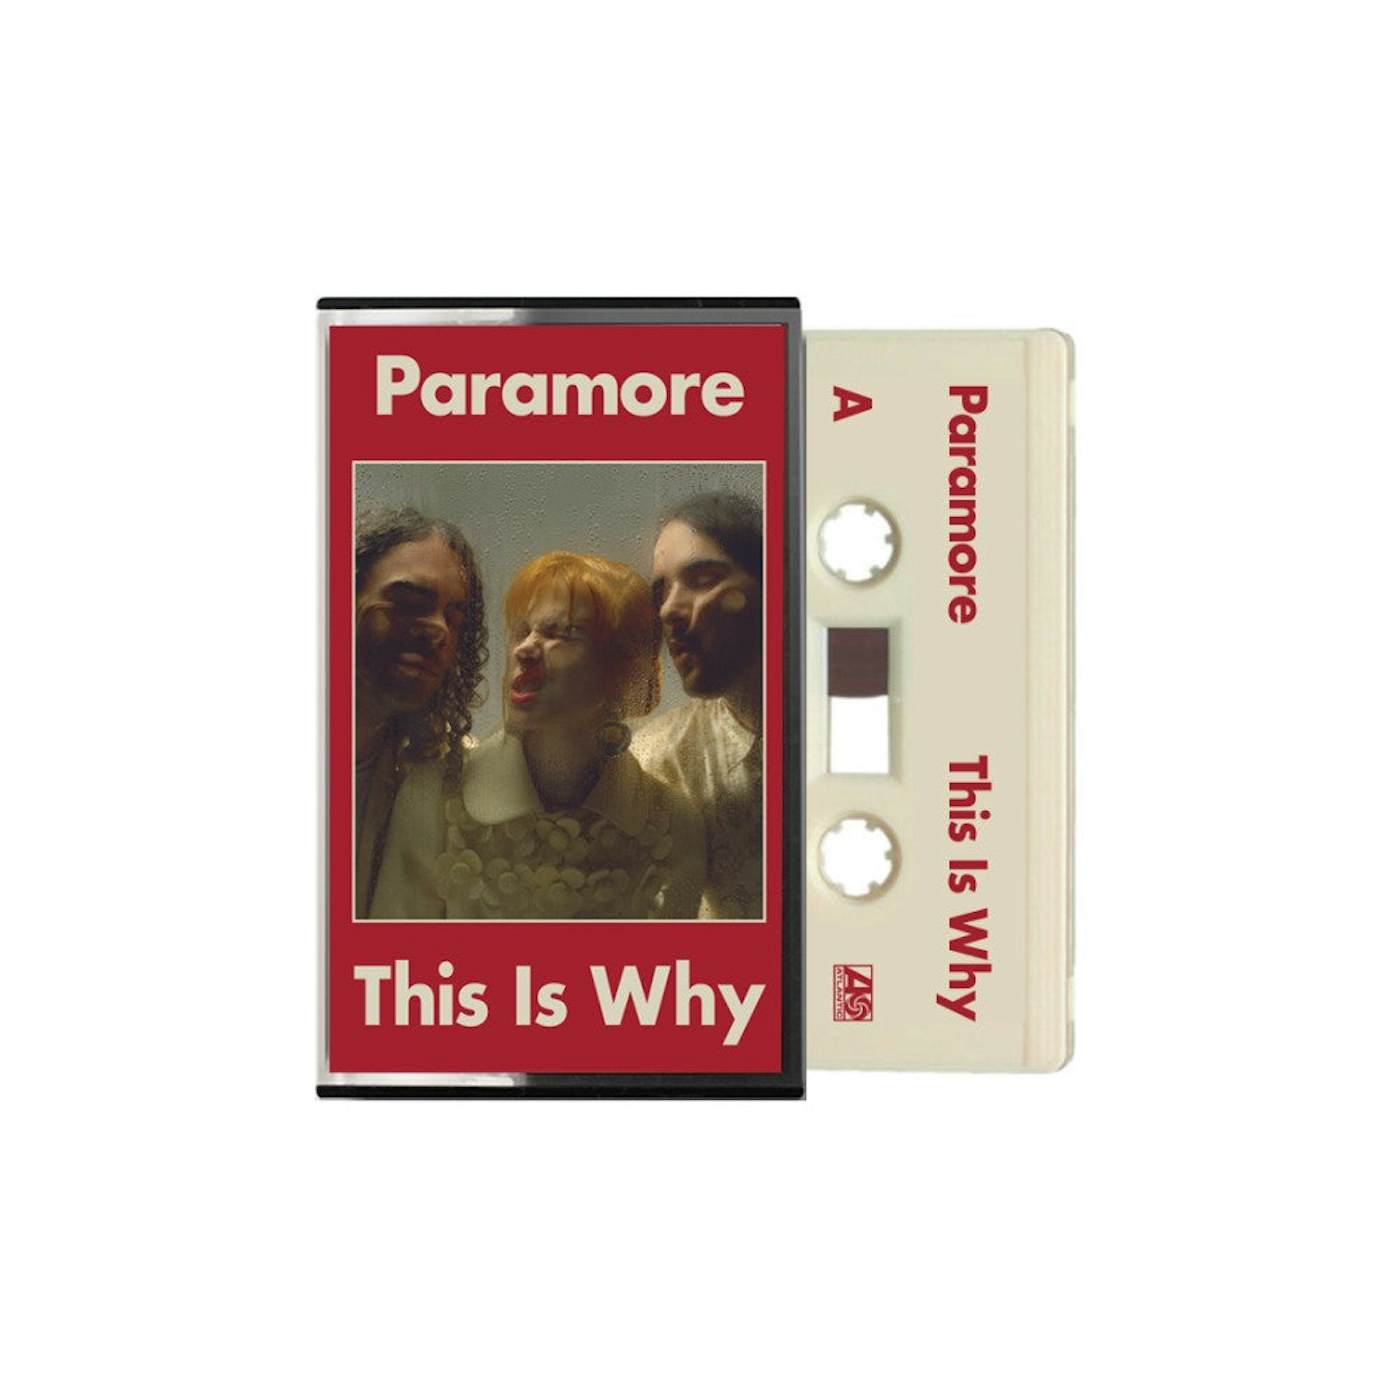 Paramore This Is Why Cassette